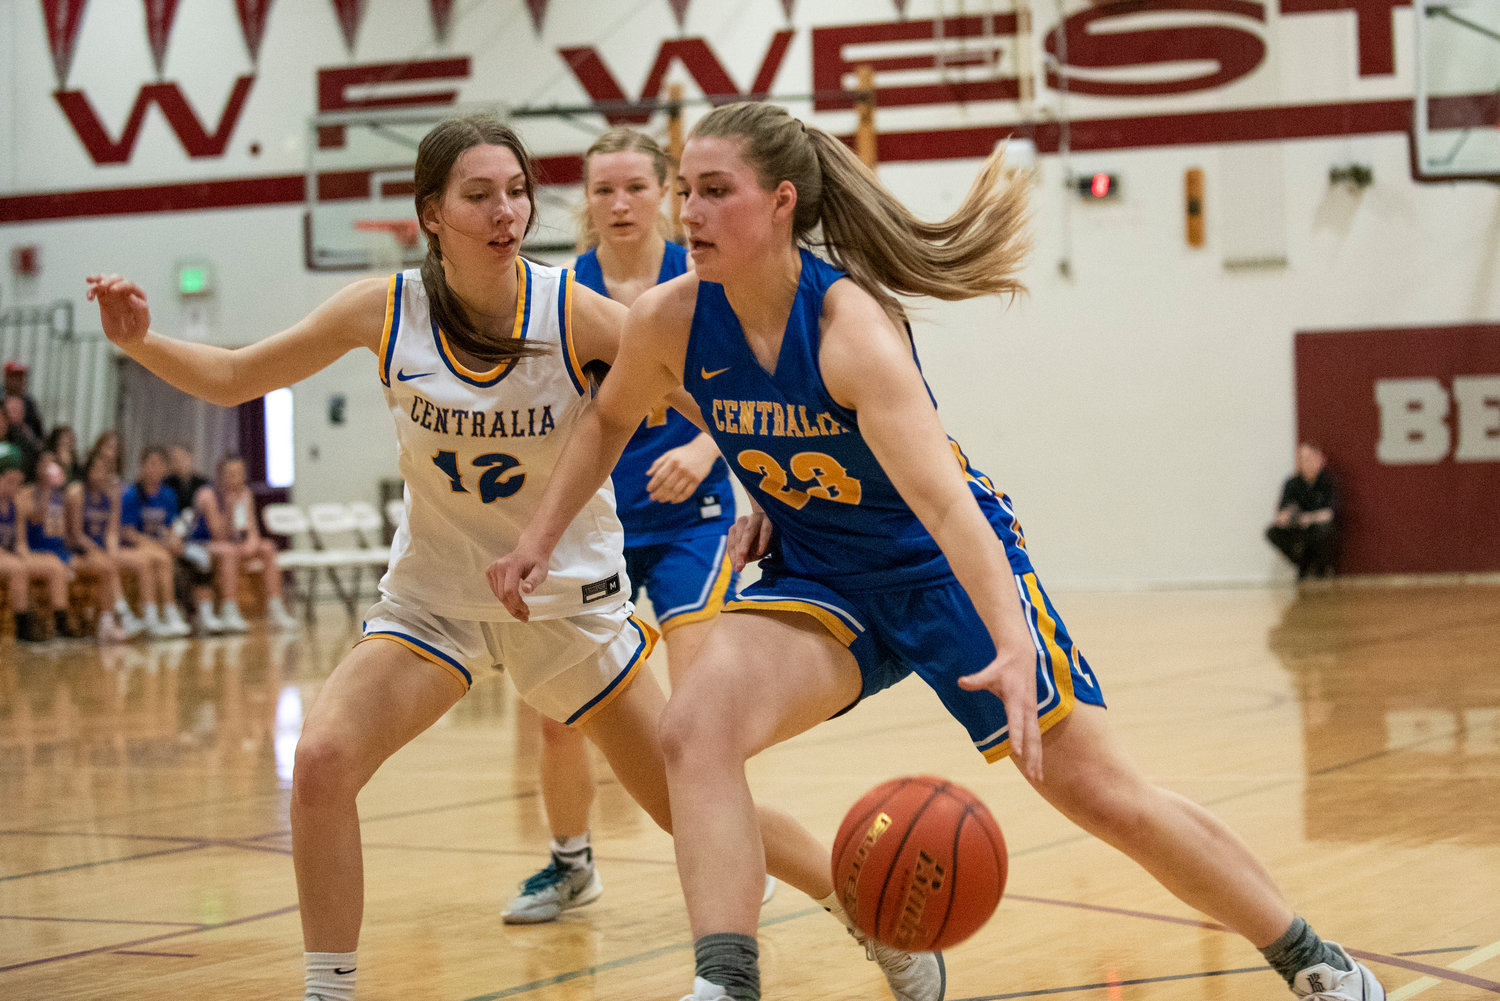 Winlock's Addison Hall (23) drives against Adna's Faith Wellander (12) during the SWW Senior All-Star Game at W.F. West High School on March 26.